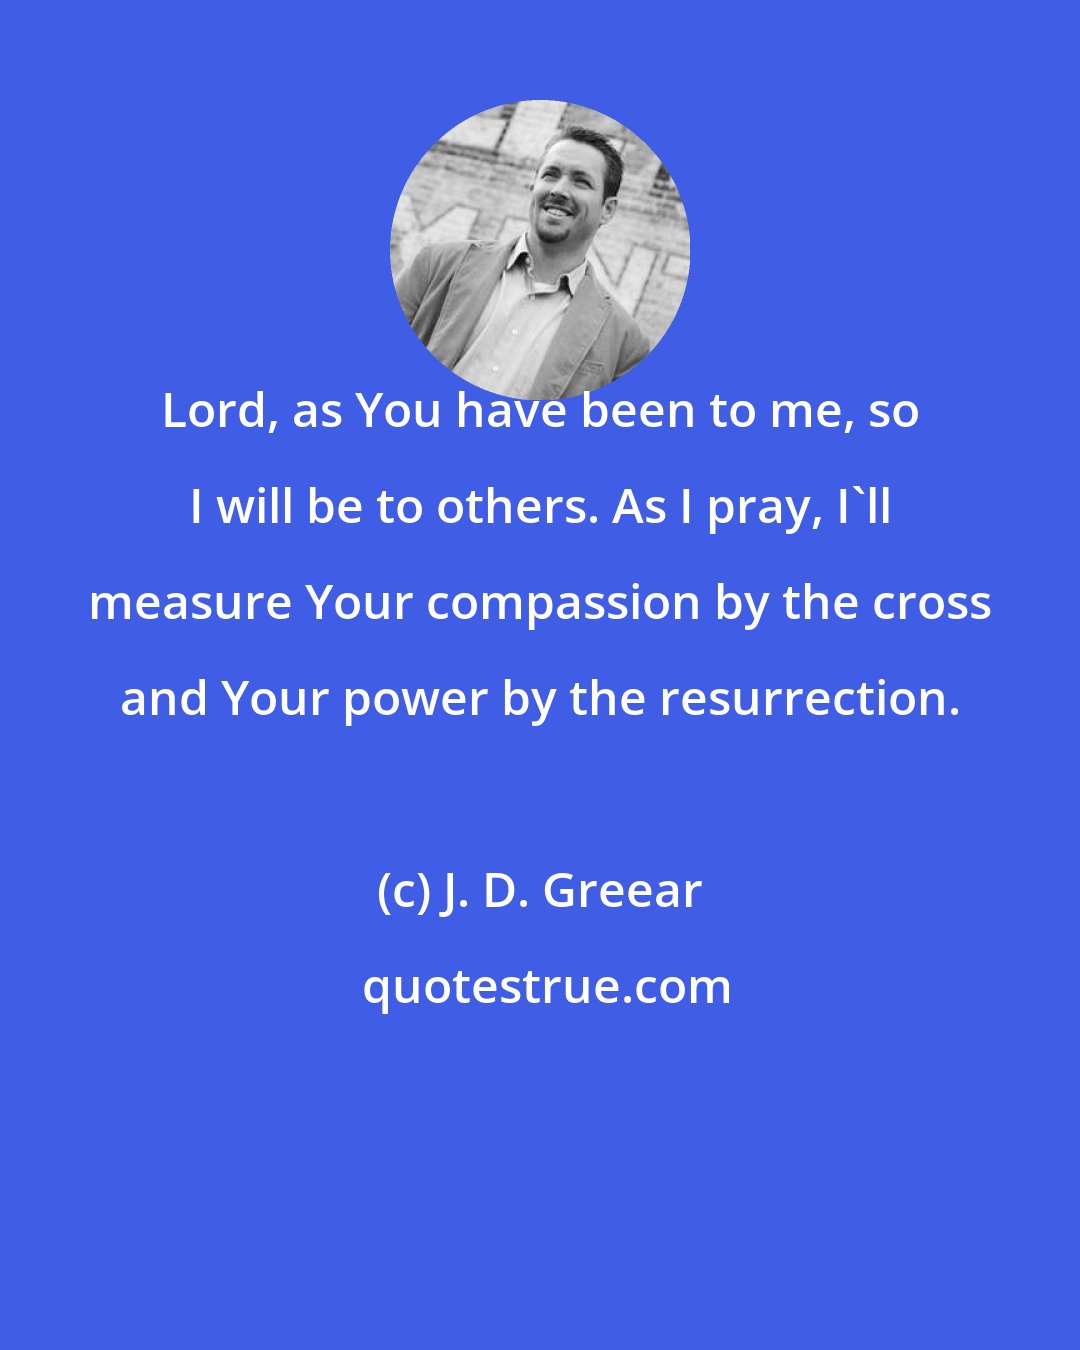 J. D. Greear: Lord, as You have been to me, so I will be to others. As I pray, I'll measure Your compassion by the cross and Your power by the resurrection.